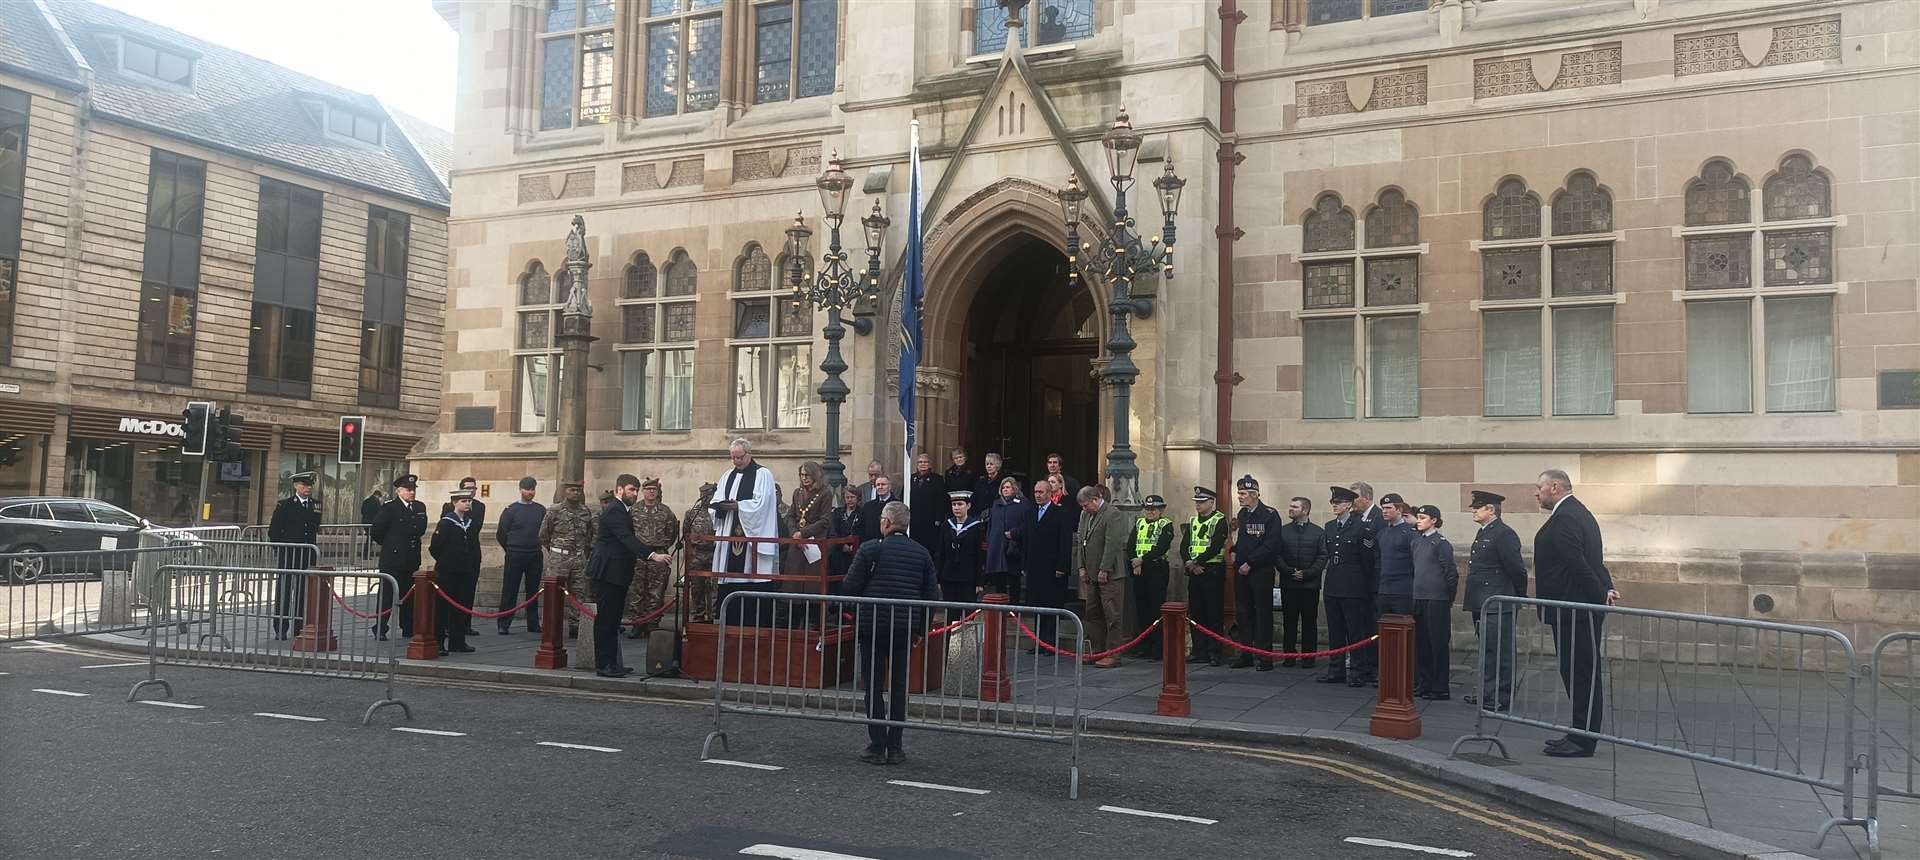 A gathering took place outside Inverness Town House to mark Commonwealth Day.